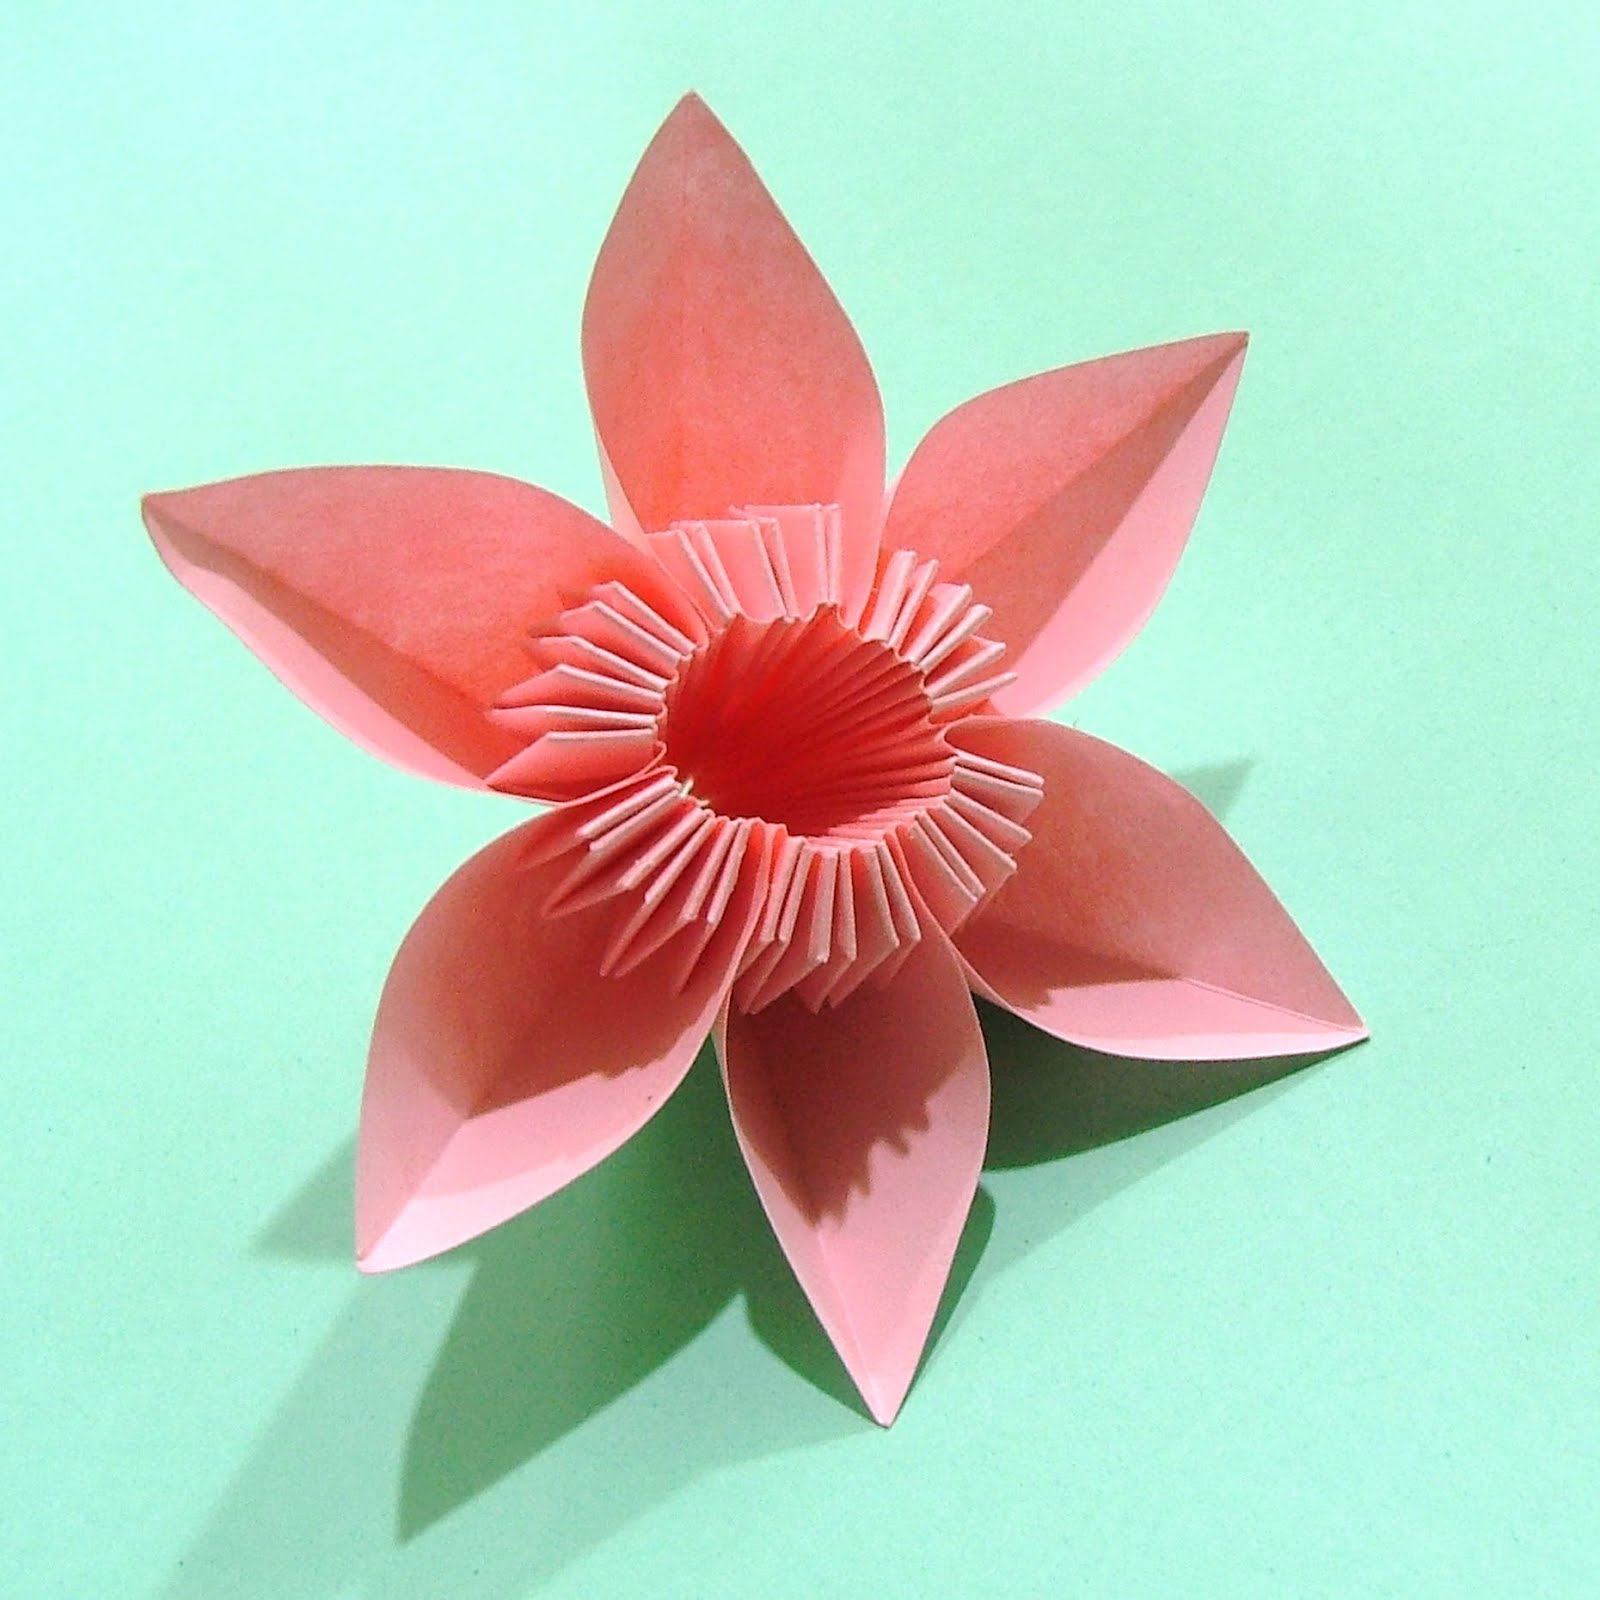 How To Make Origami Flowers, Simple Origami Flower Design, Beautiful